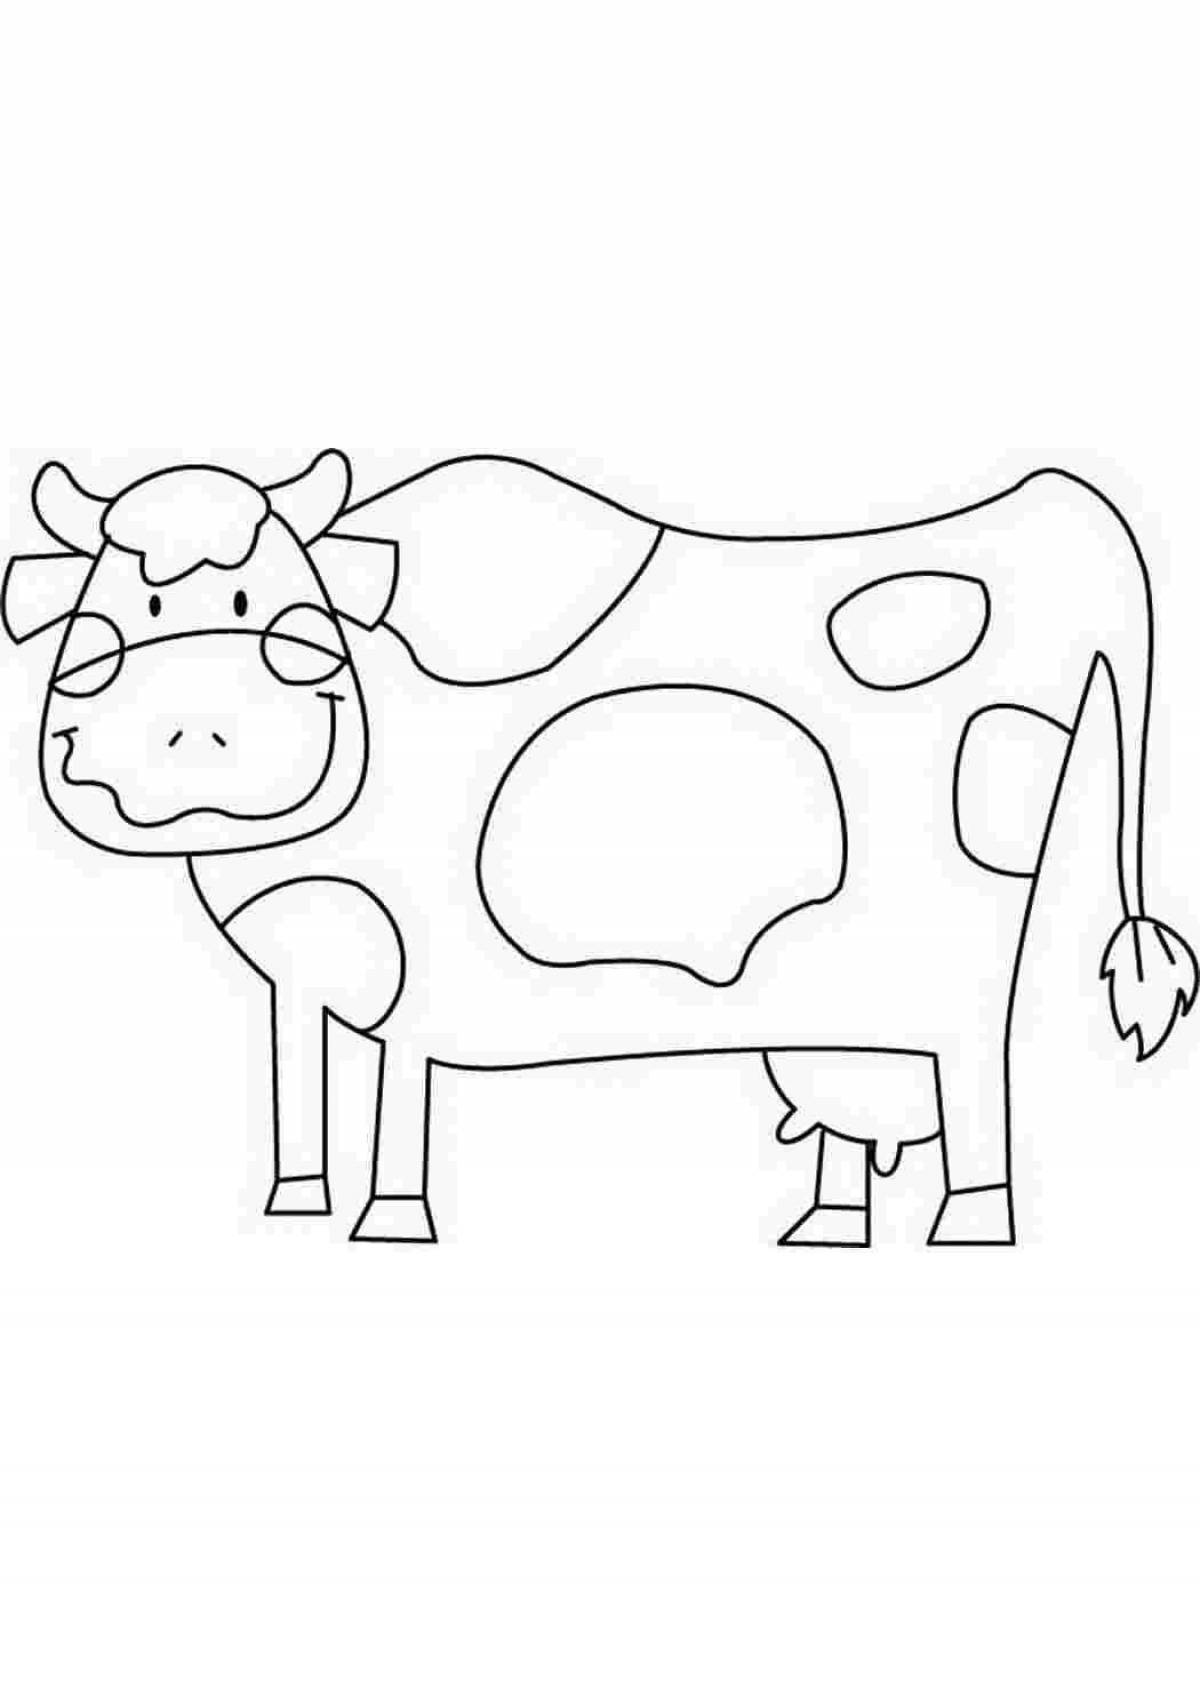 Violent cow coloring book for children 3-4 years old